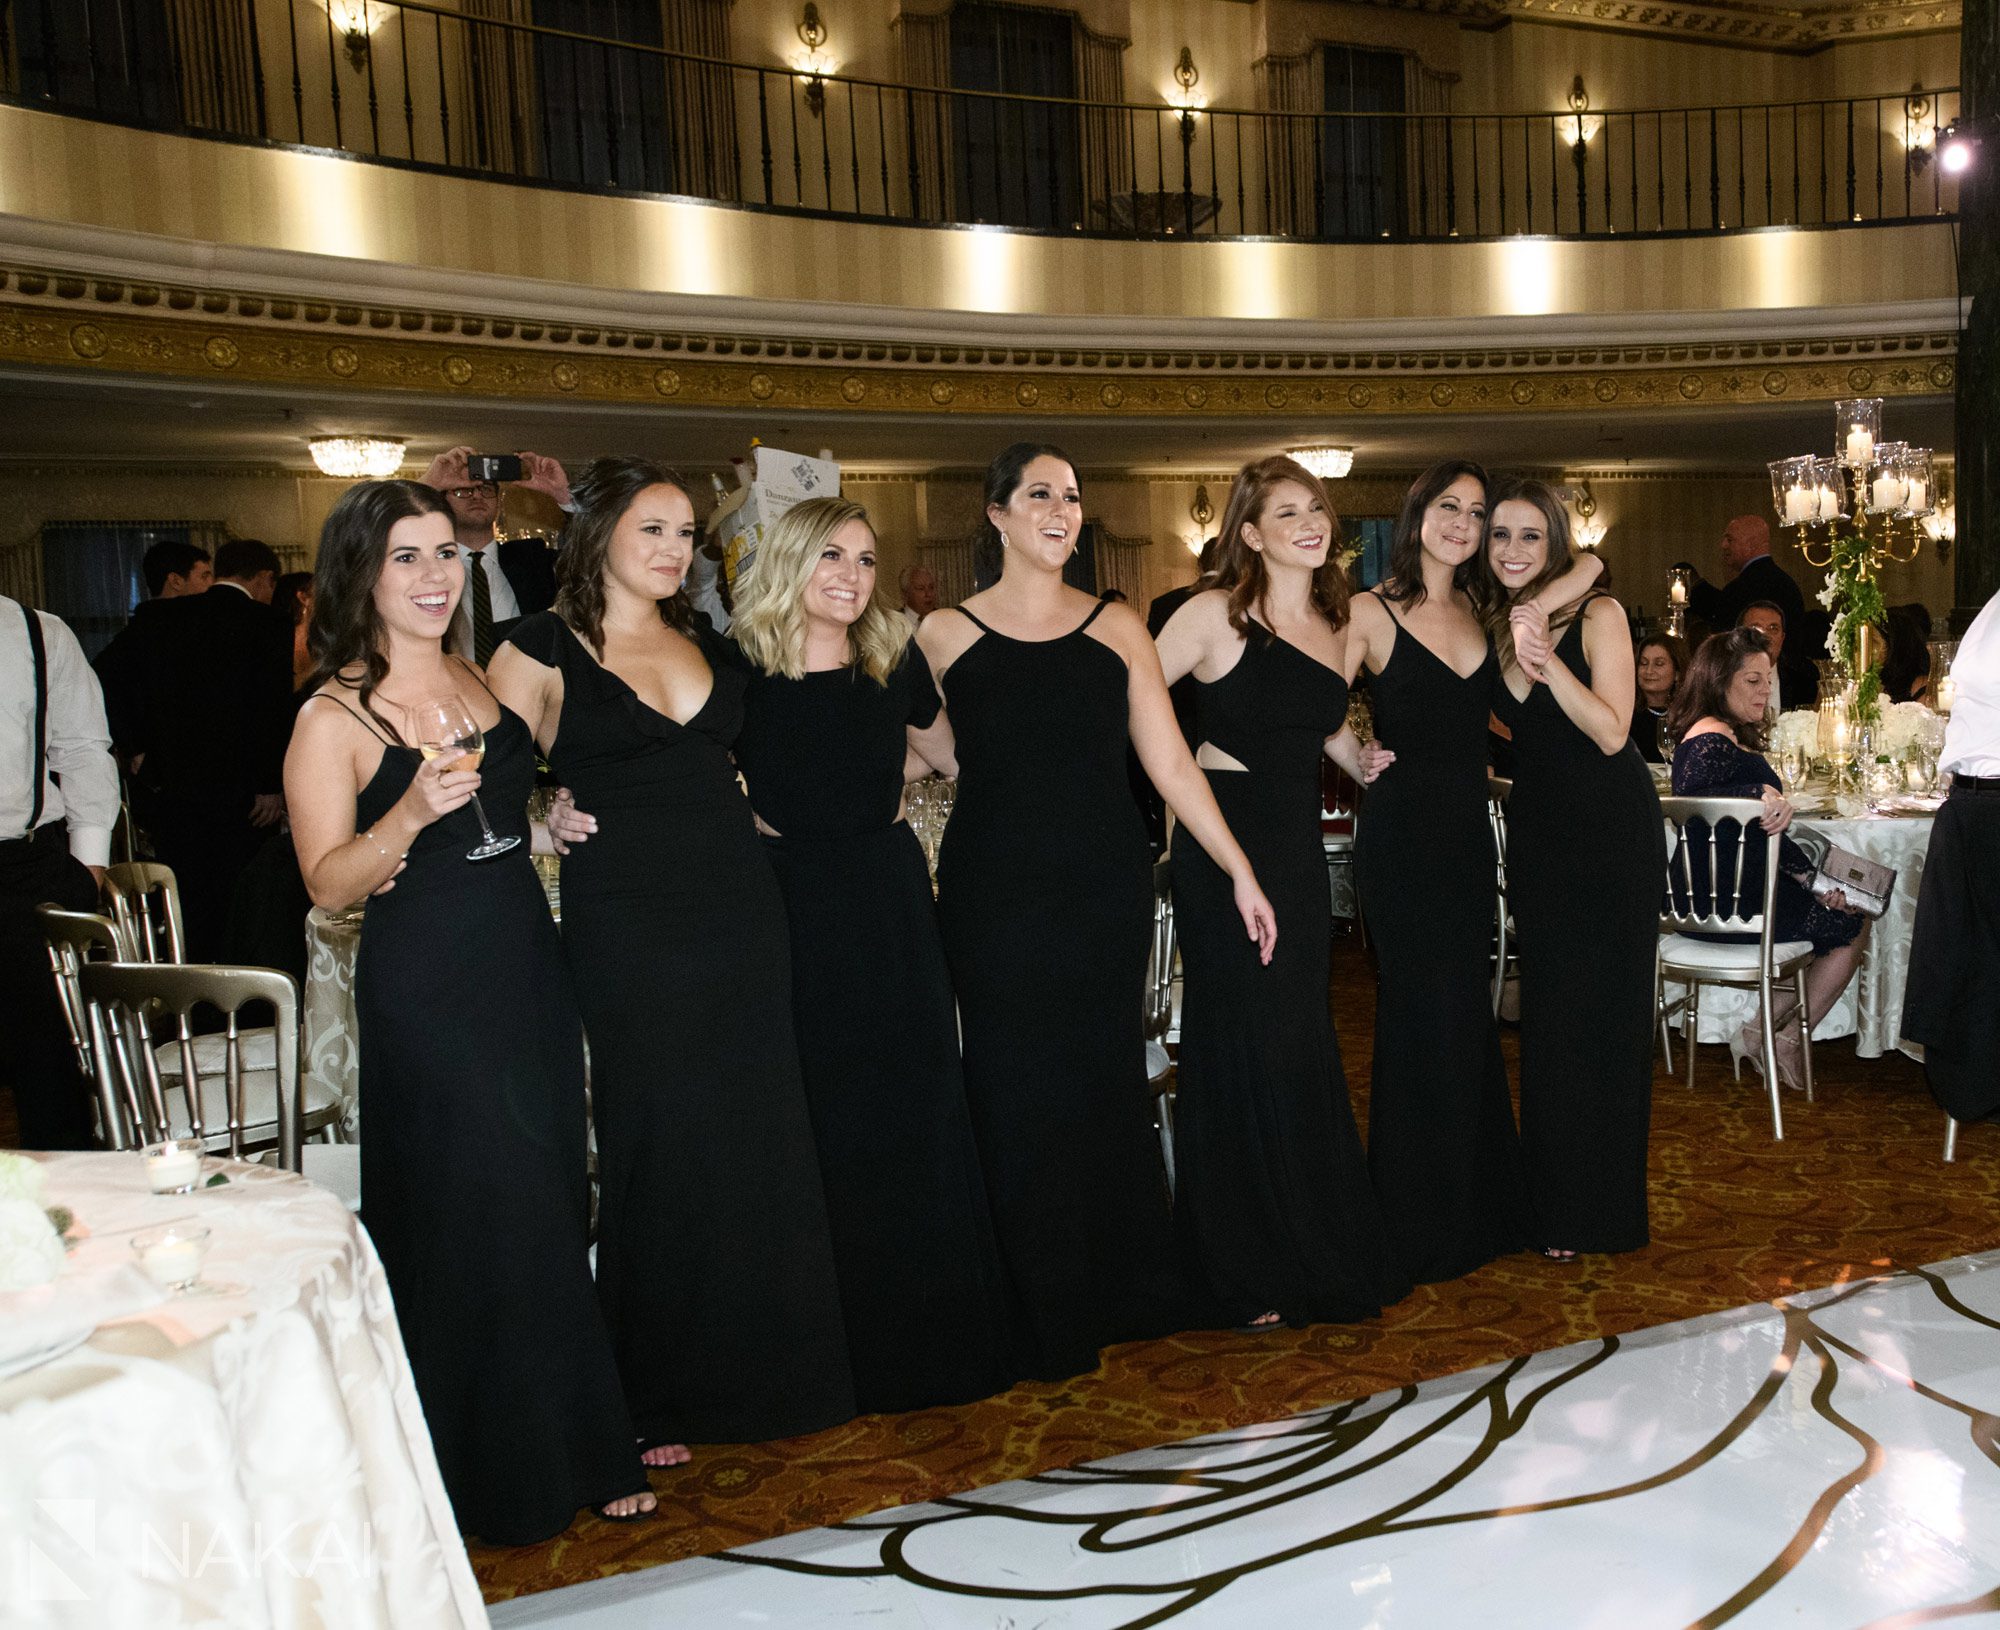 intercontinental magnificent mile reception wedding pictures grand ballroom